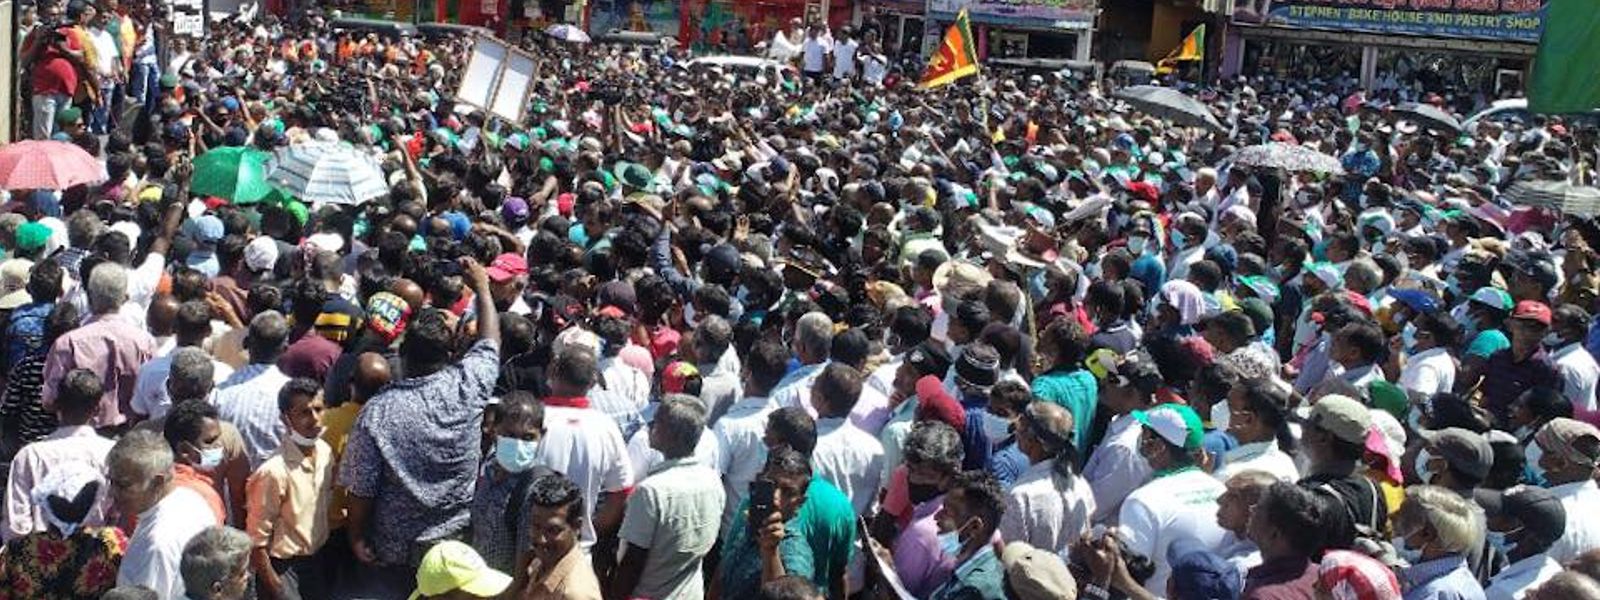 SJB Protest March to reach Danowita today (28)